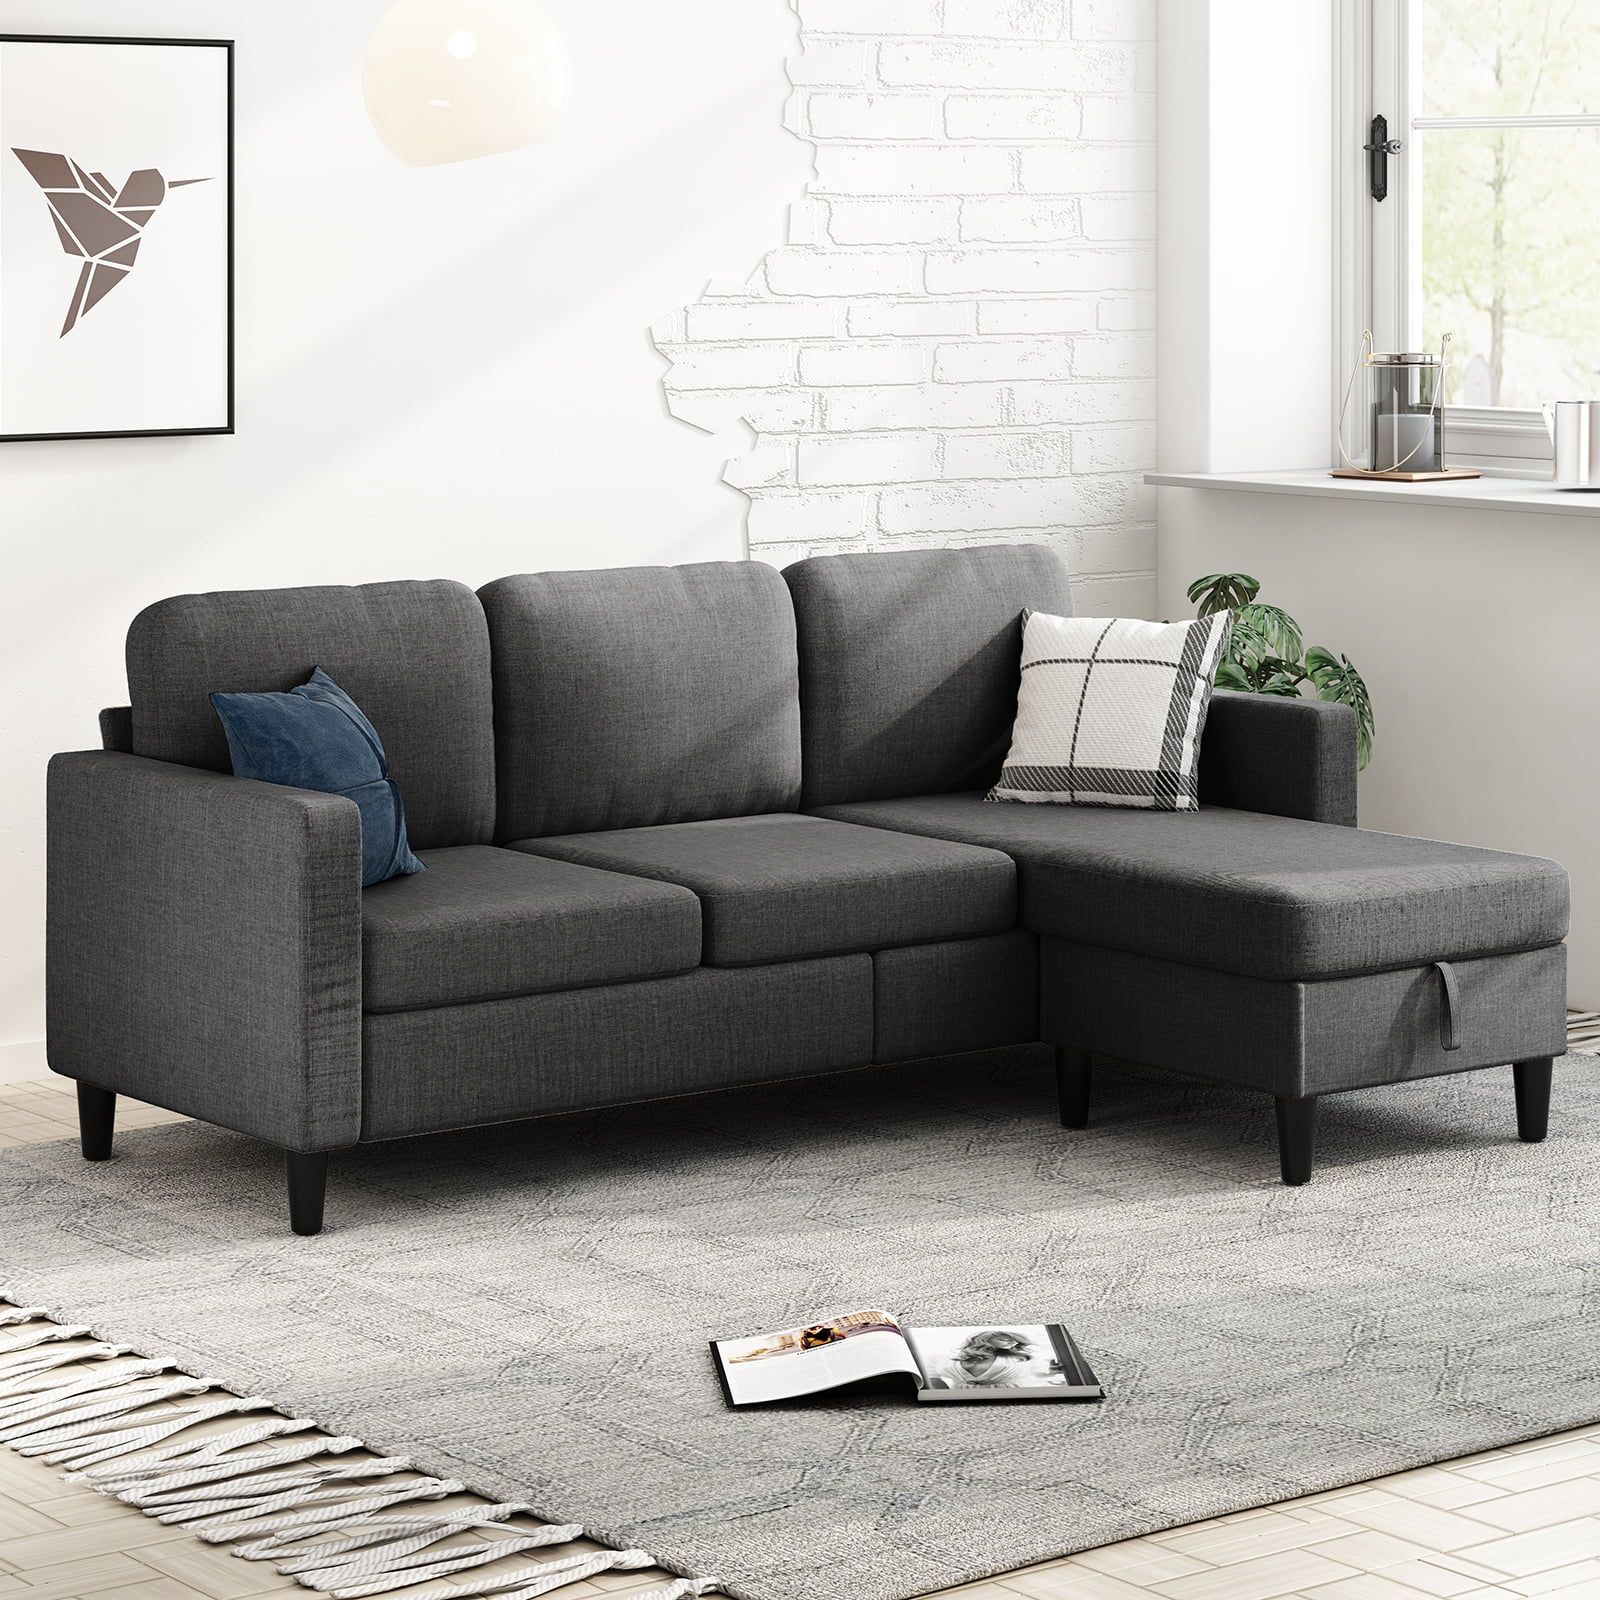 Muzz Sectional Sofa With Movable Ottoman, Free Combination Sectional Couch,  Small L Shaped Sectional Sofa With Storage Ottoman, Modern Linen Fabric Sofa  Set For Living Room (Dark Grey) – Walmart Regarding Modern Linen Fabric L Shaped Couches (Photo 4 of 15)